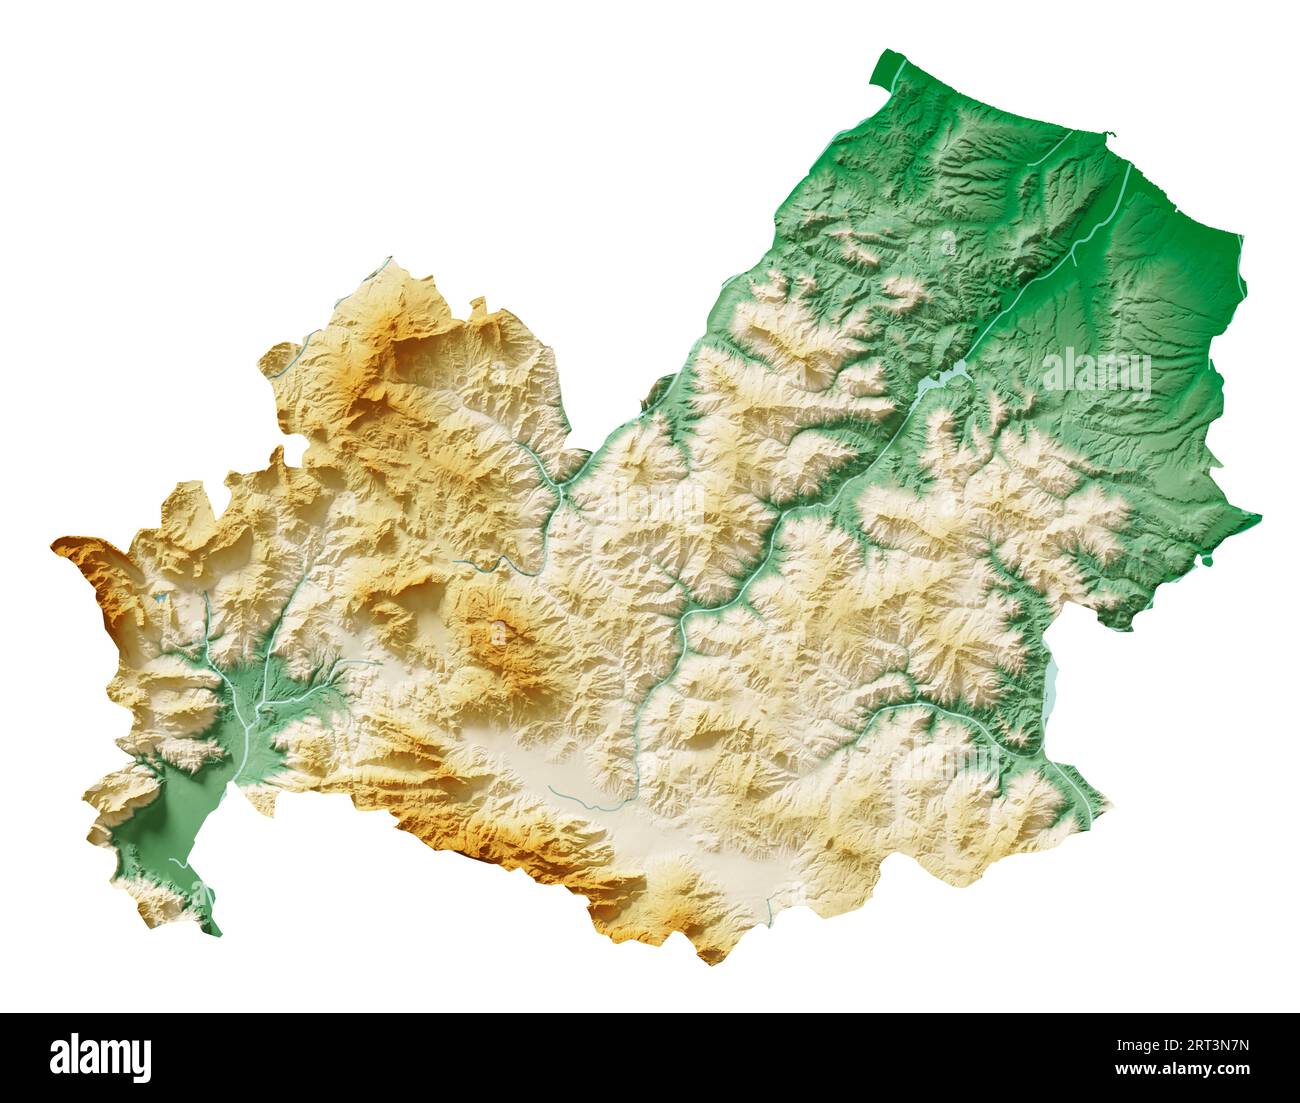 Molise. A region of Italy. Detailed 3D rendering of a shaded relief map, rivers, lakes. Colored by elevation. Pure white background. Stock Photo